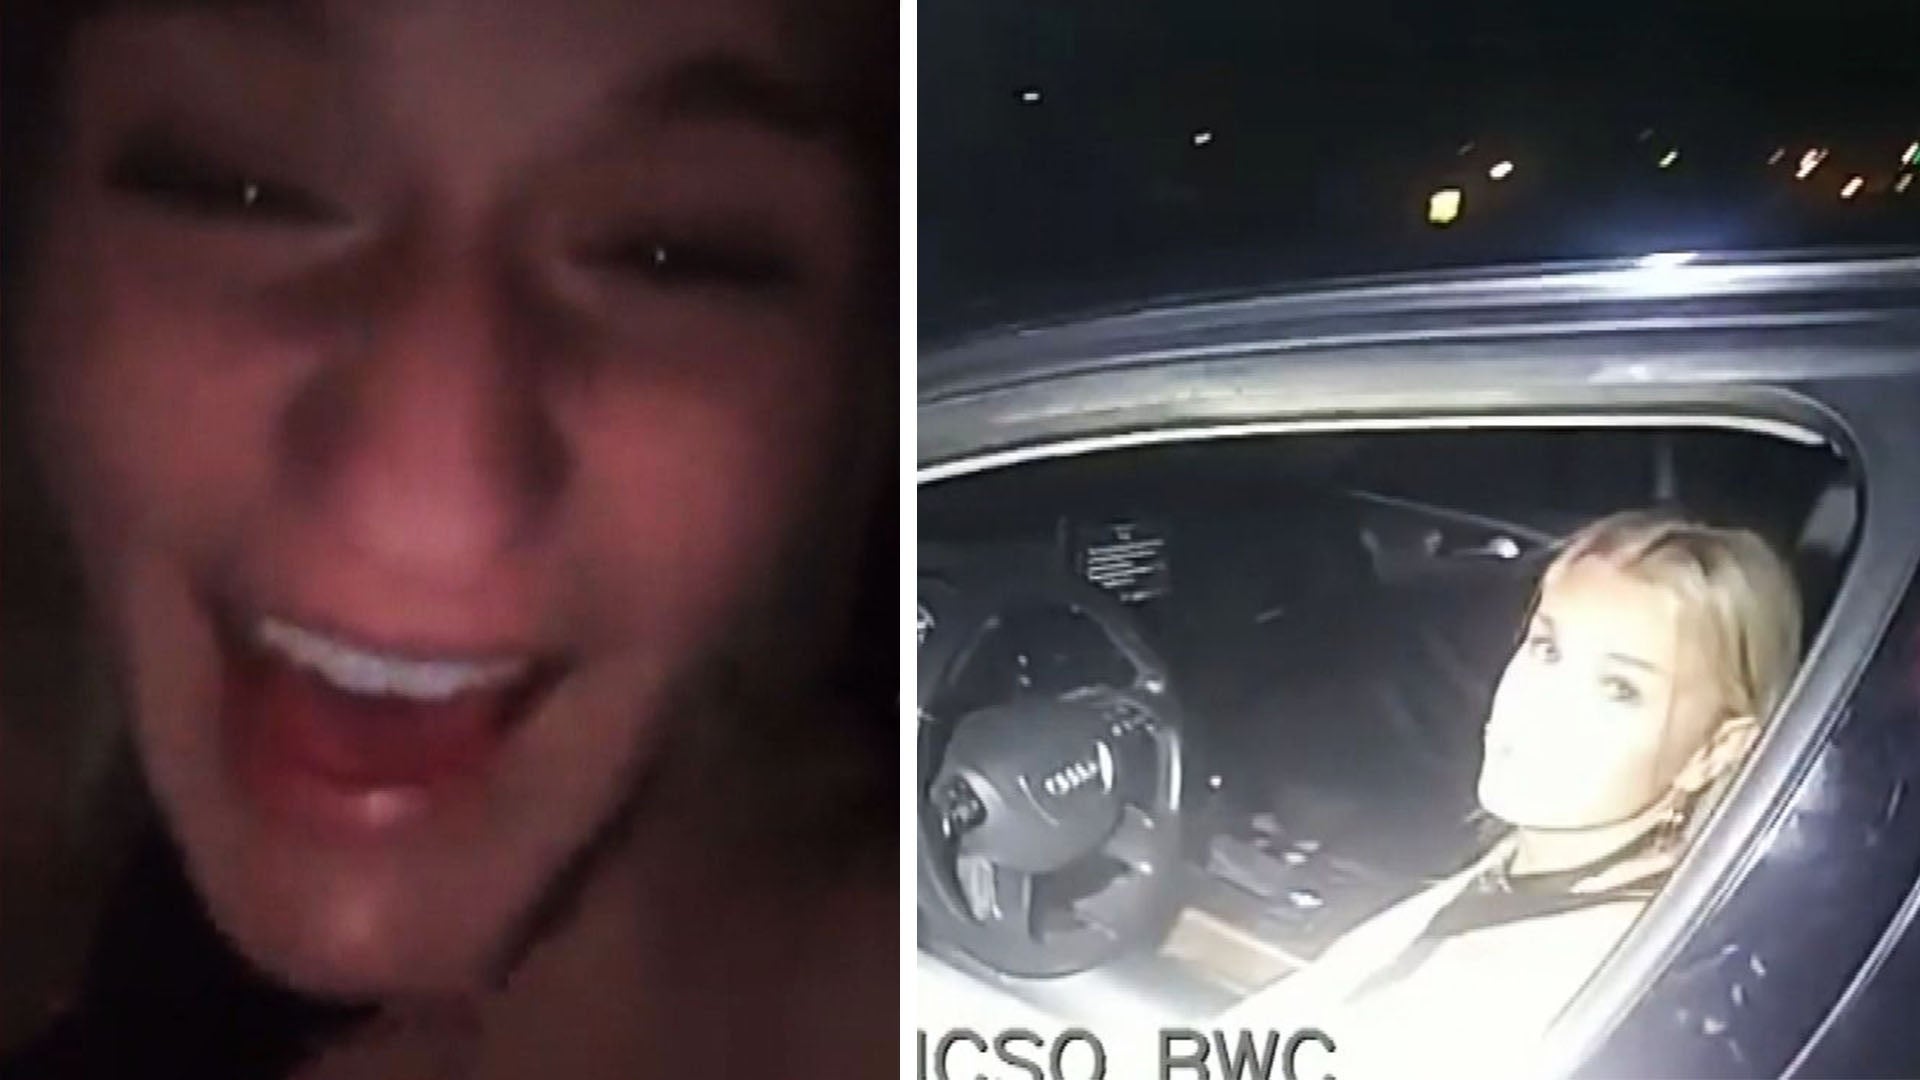 Drunk Girls Abused - Teen Who Said She Got Out of DUI by Flirting Confronted With Bodycam Video  | Inside Edition